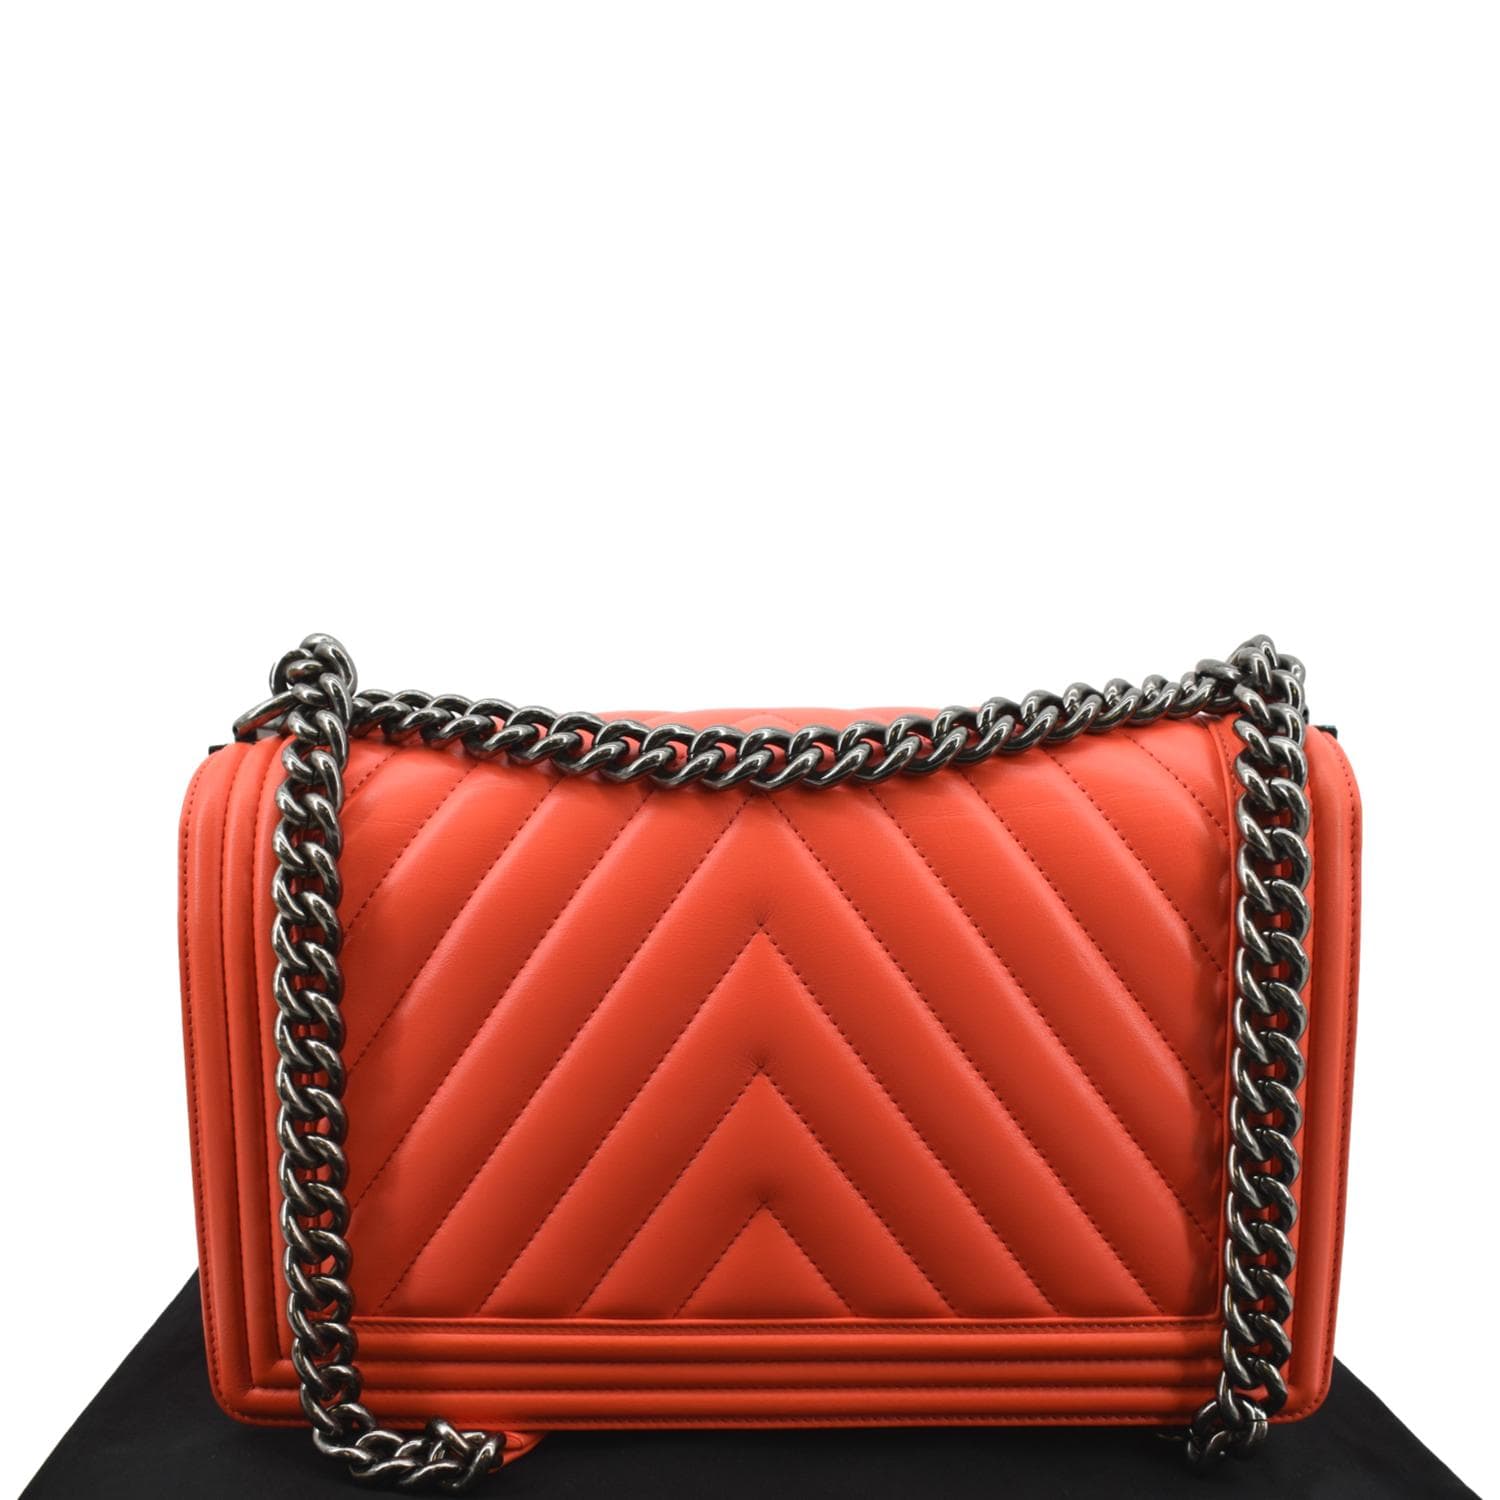 Chanel Chevron Jumbo Rectangular Flap Quilted Leather Shoulder Bag Red (Repainted)